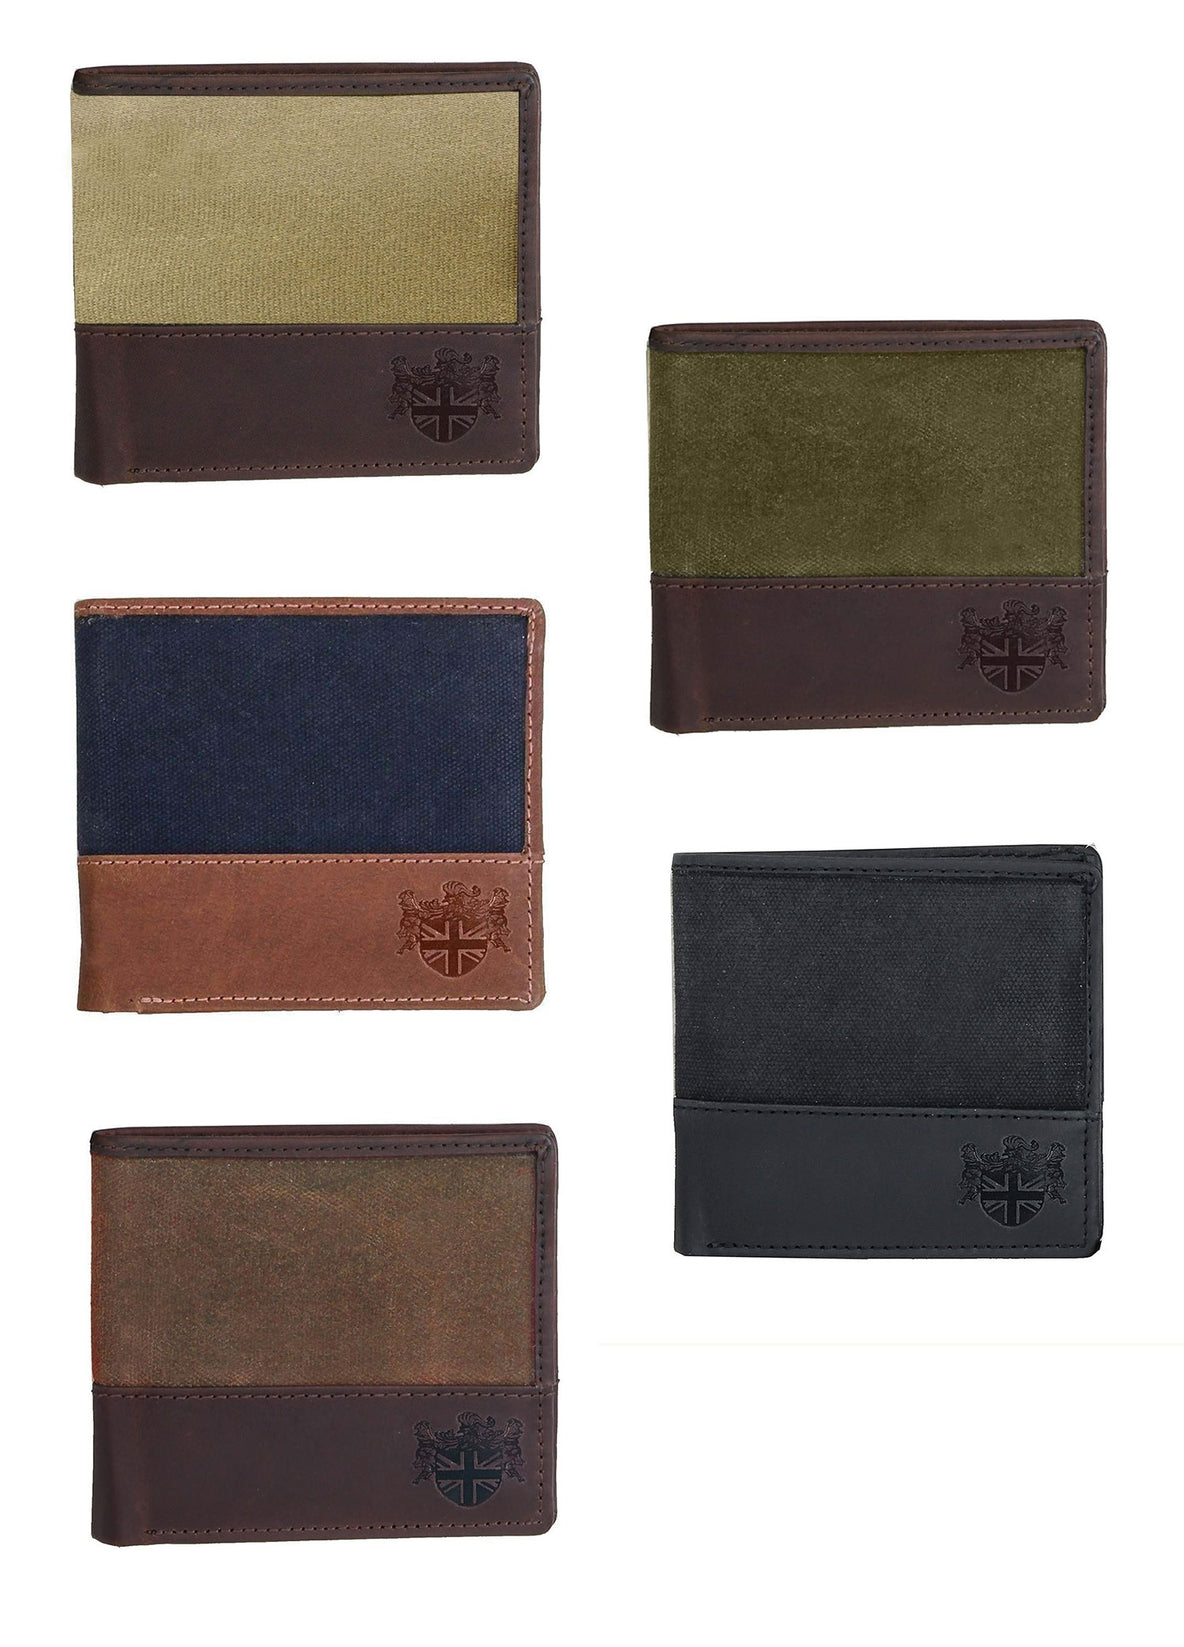 British Bag Co. Wax Canvas Wallet with leather  | Green, Blue, Black, Khaki